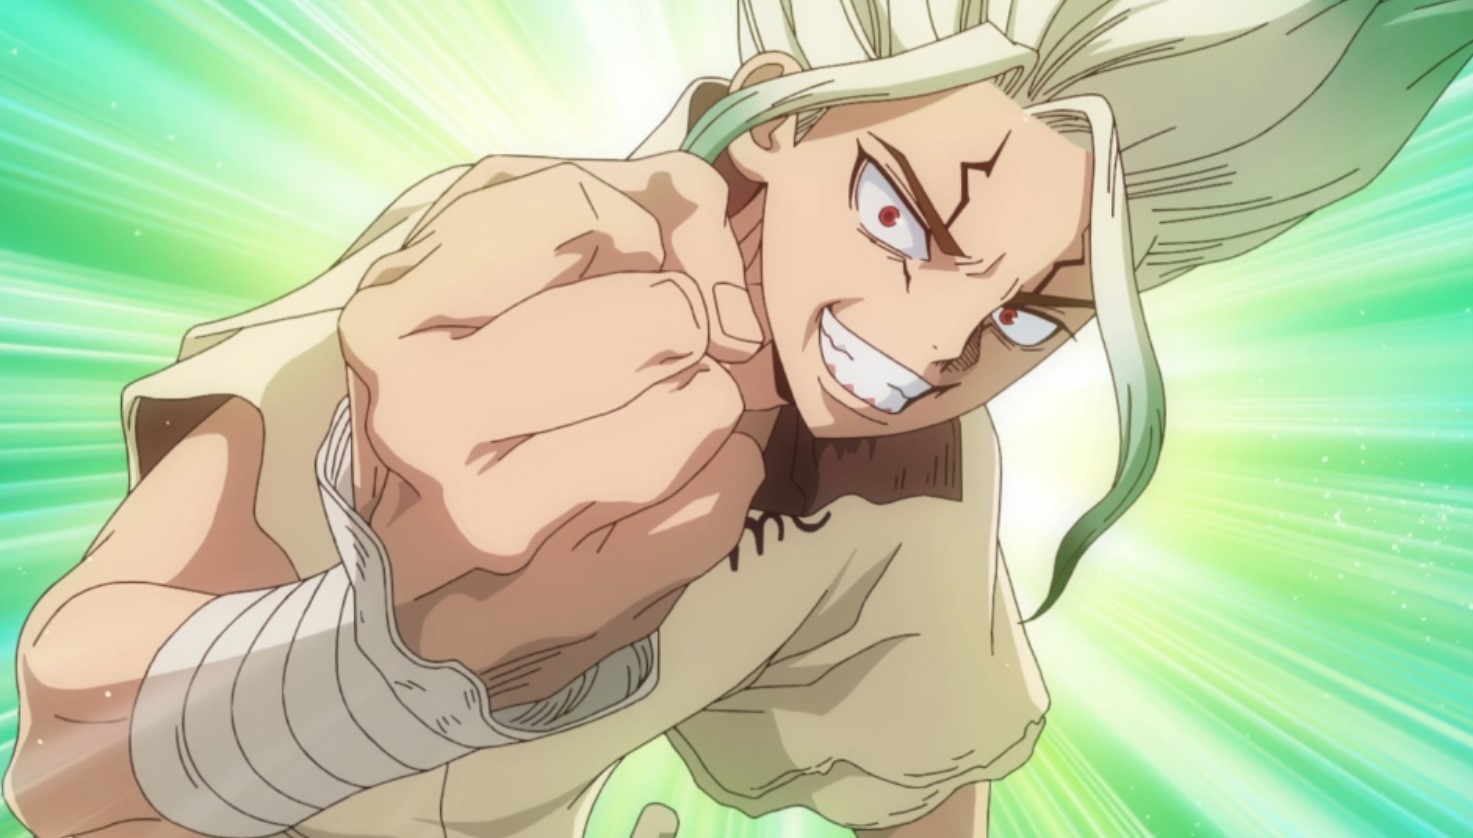 Dr. Stone Season 3 Episode 7 Release Date, Time and Where to Watch